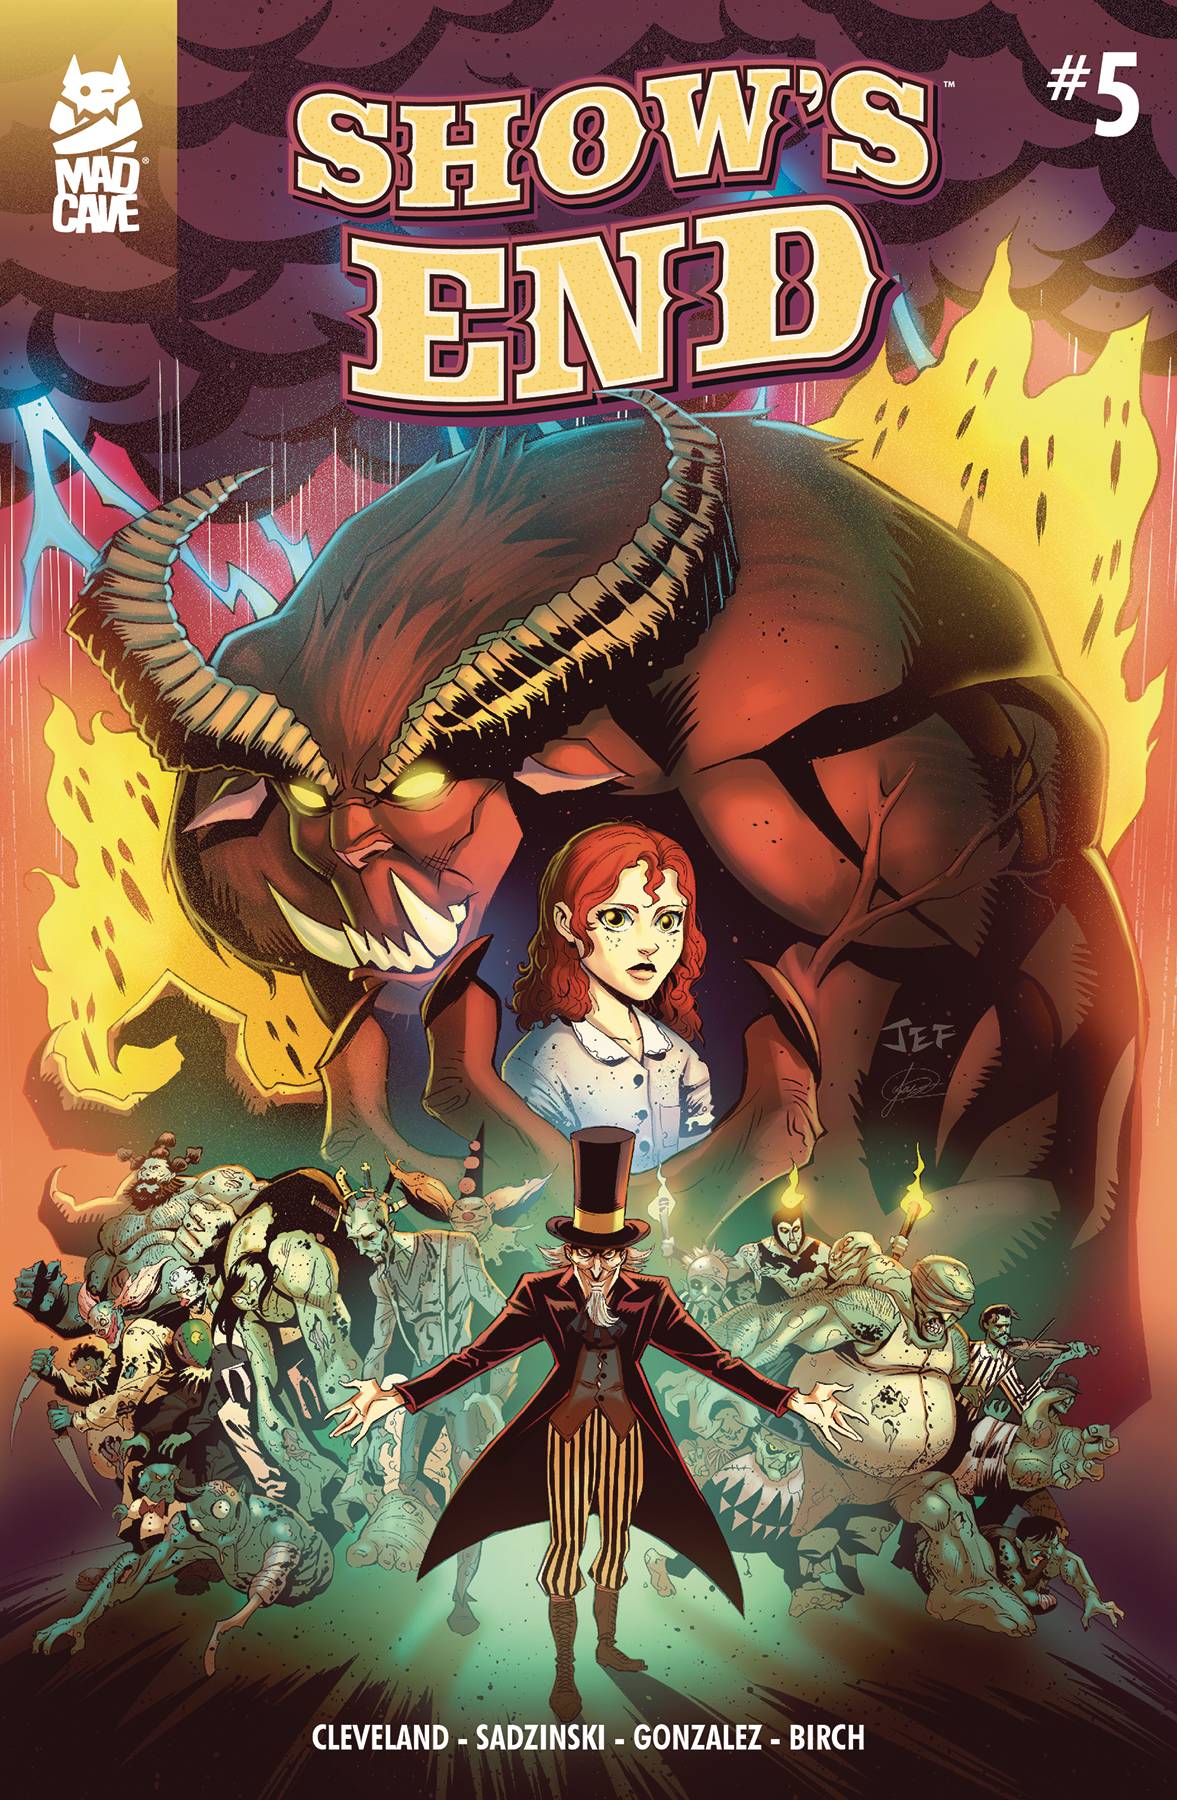 Show's End #5 (2019)